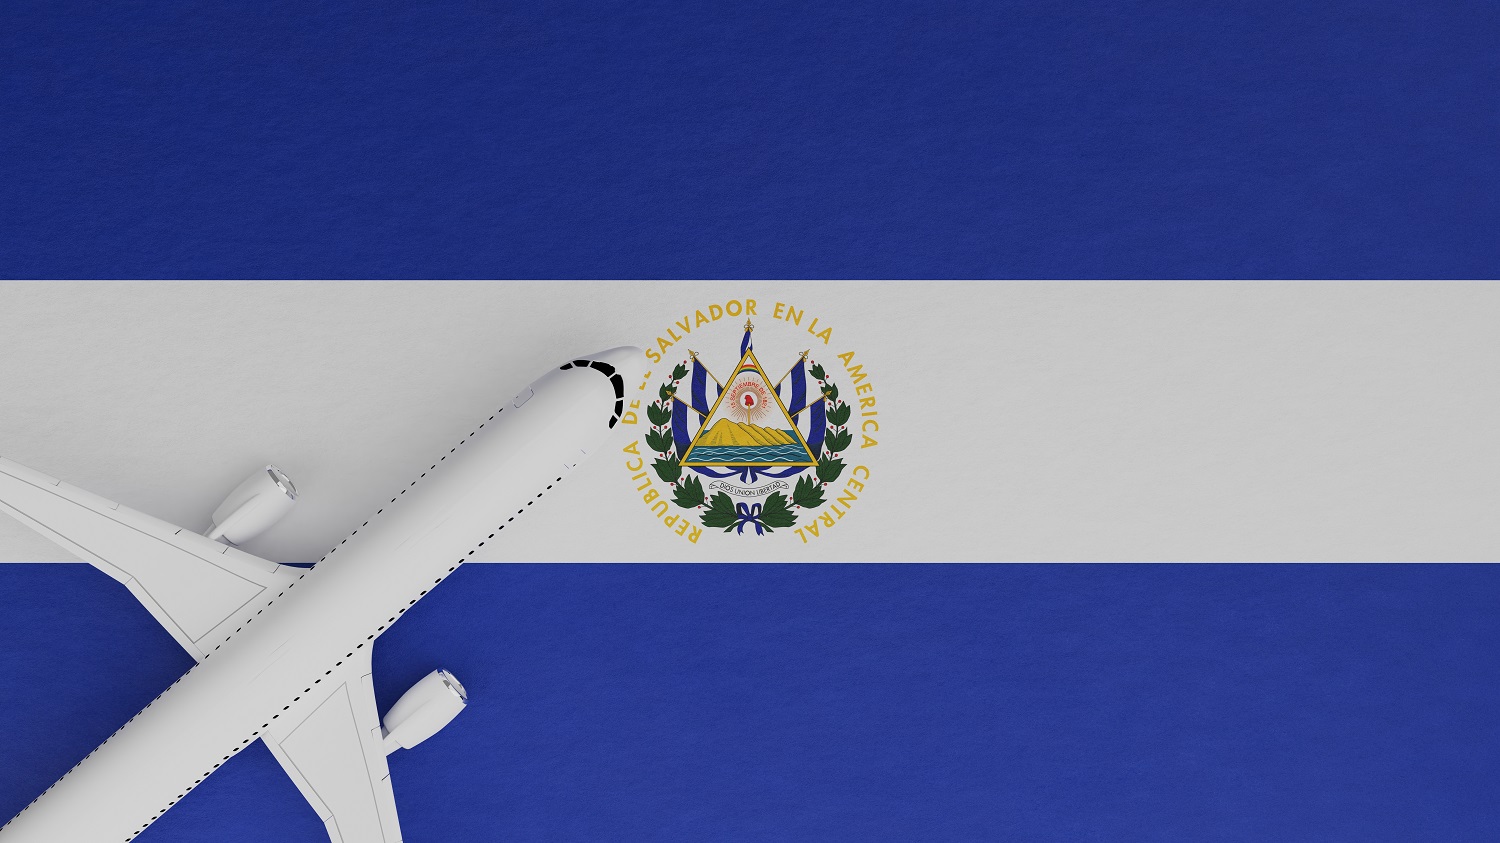 A top-down view of a plane on top of the national flag of El Salvador.